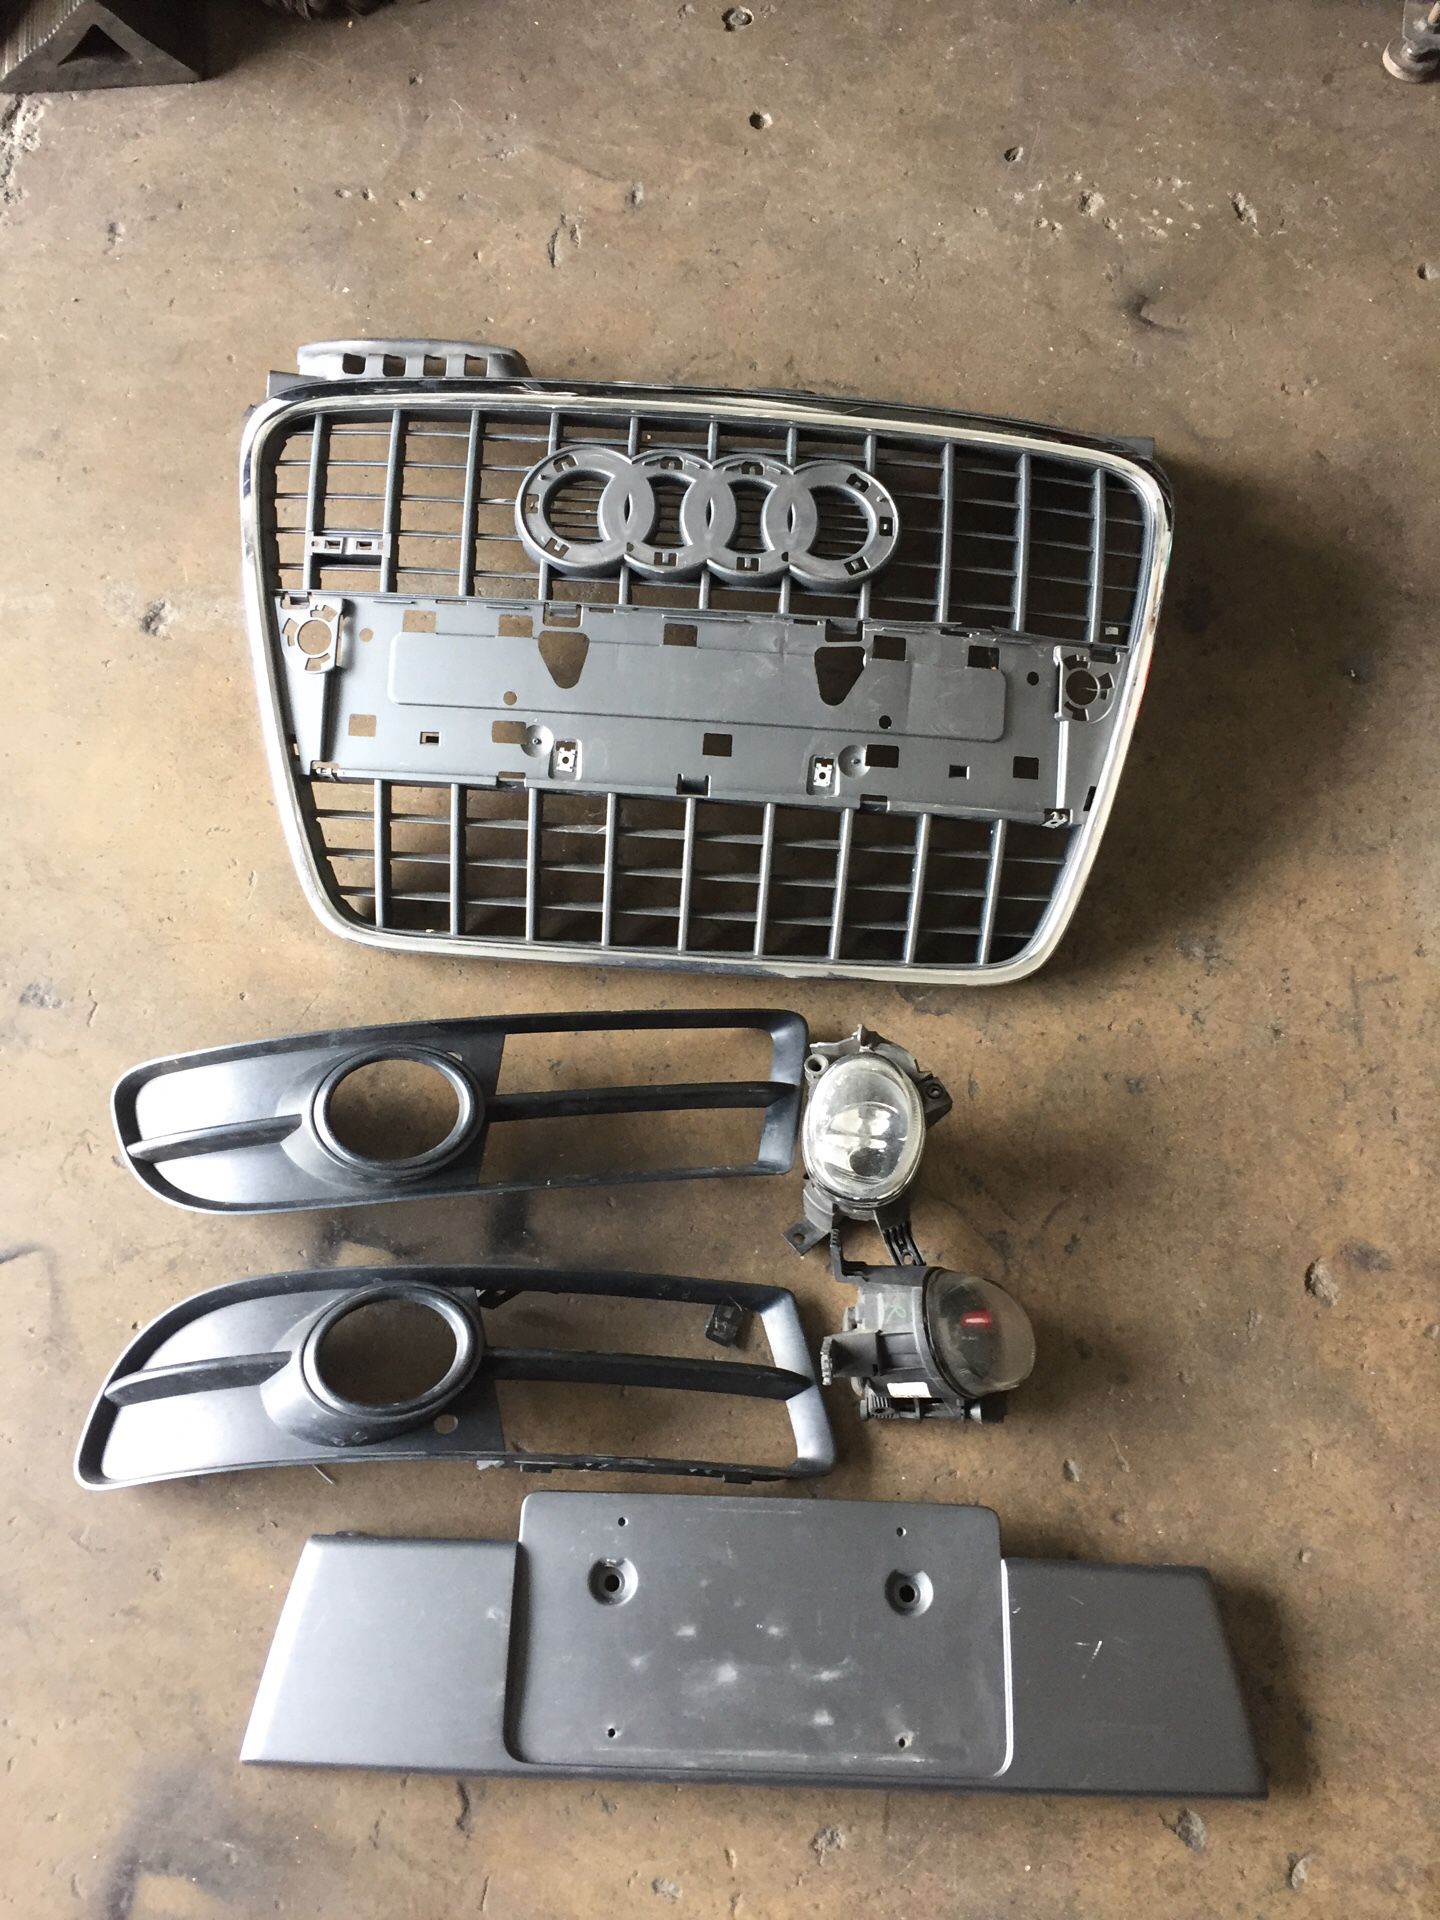 07 up Audi A4 parts only fog lights and covers, grill and license plate holder sold